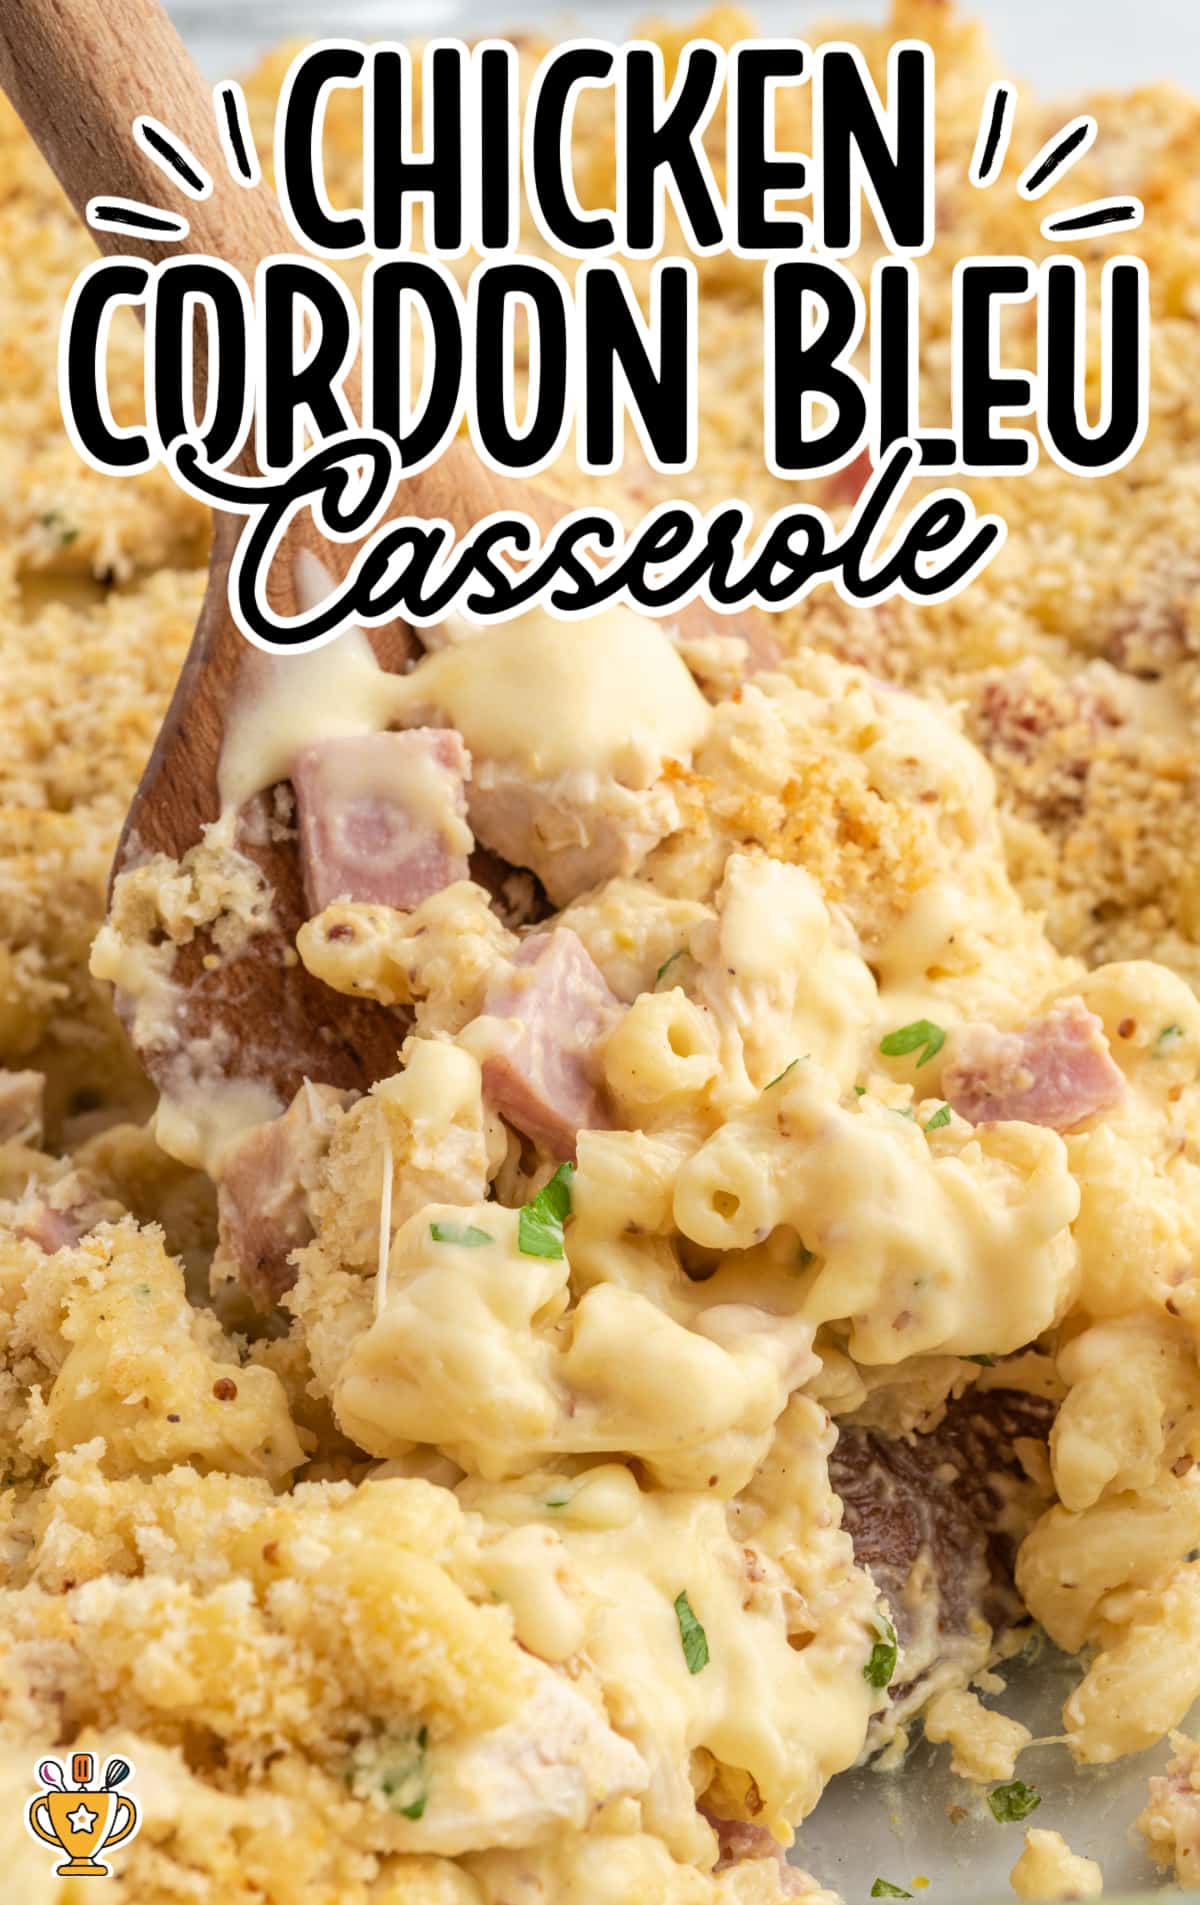 chicken cordon bleu casserole with wooden spoon scooping out a serving